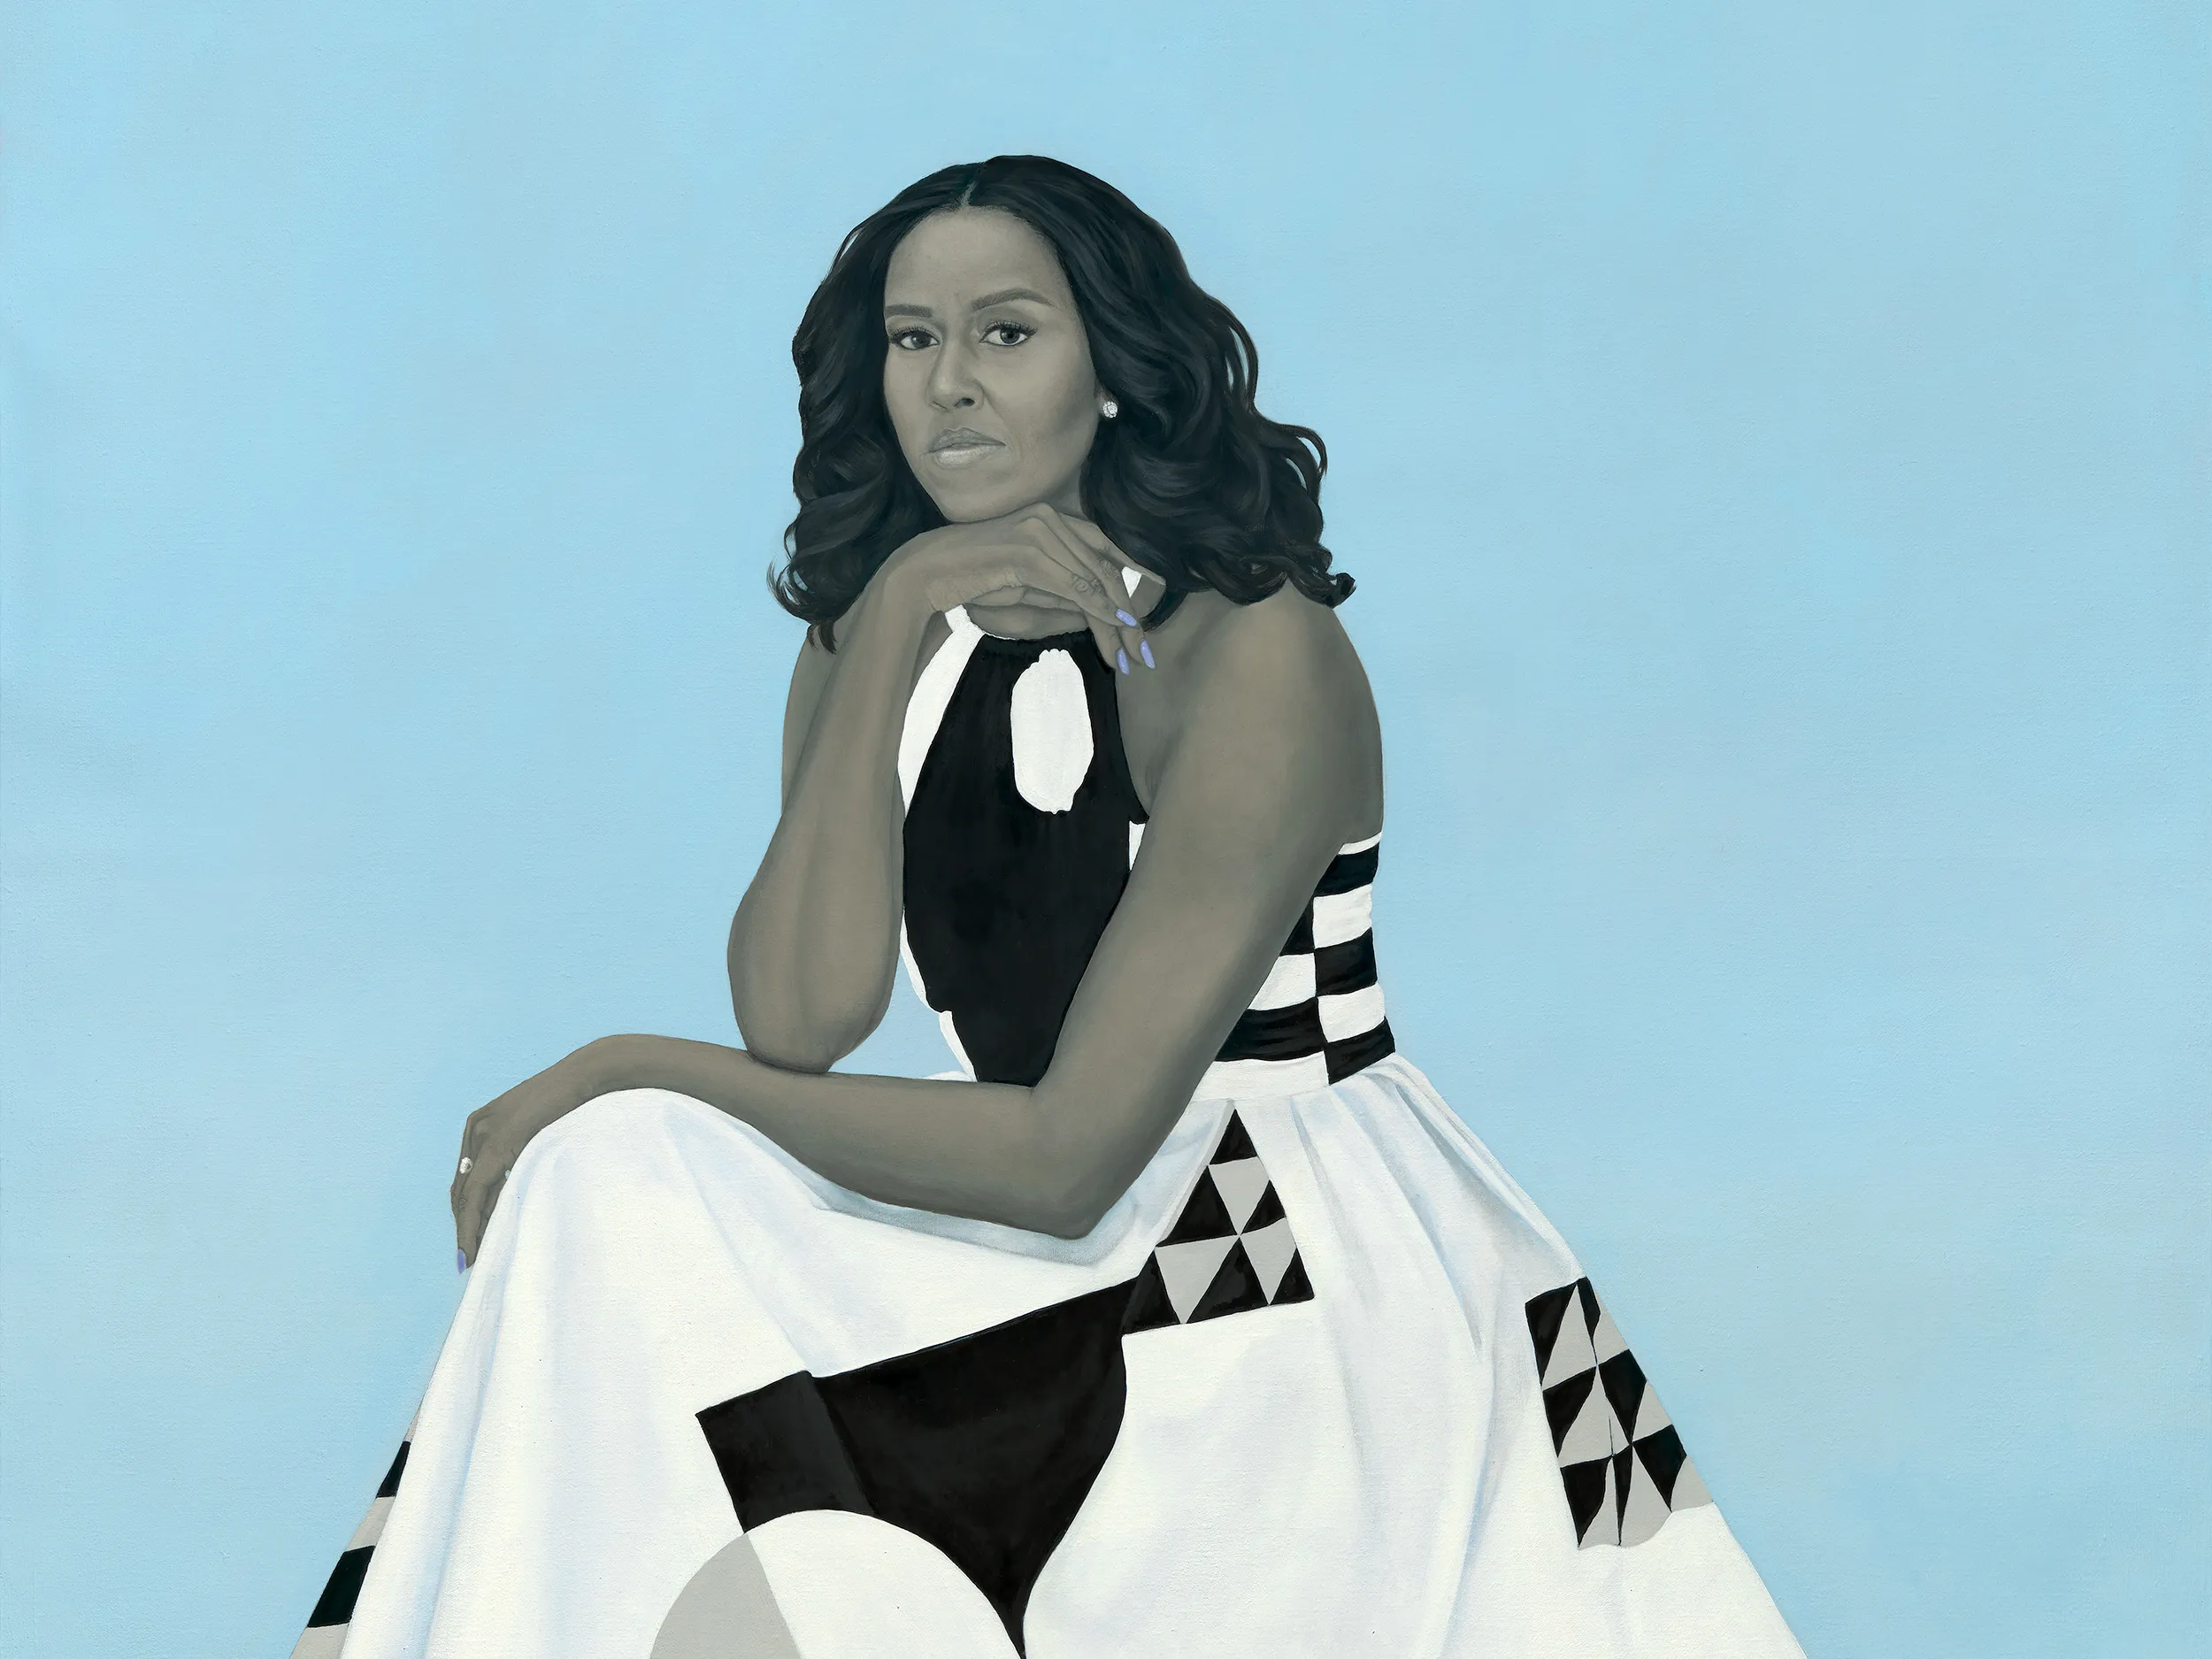 Portrait of Michelle Obama by Amy Sherald